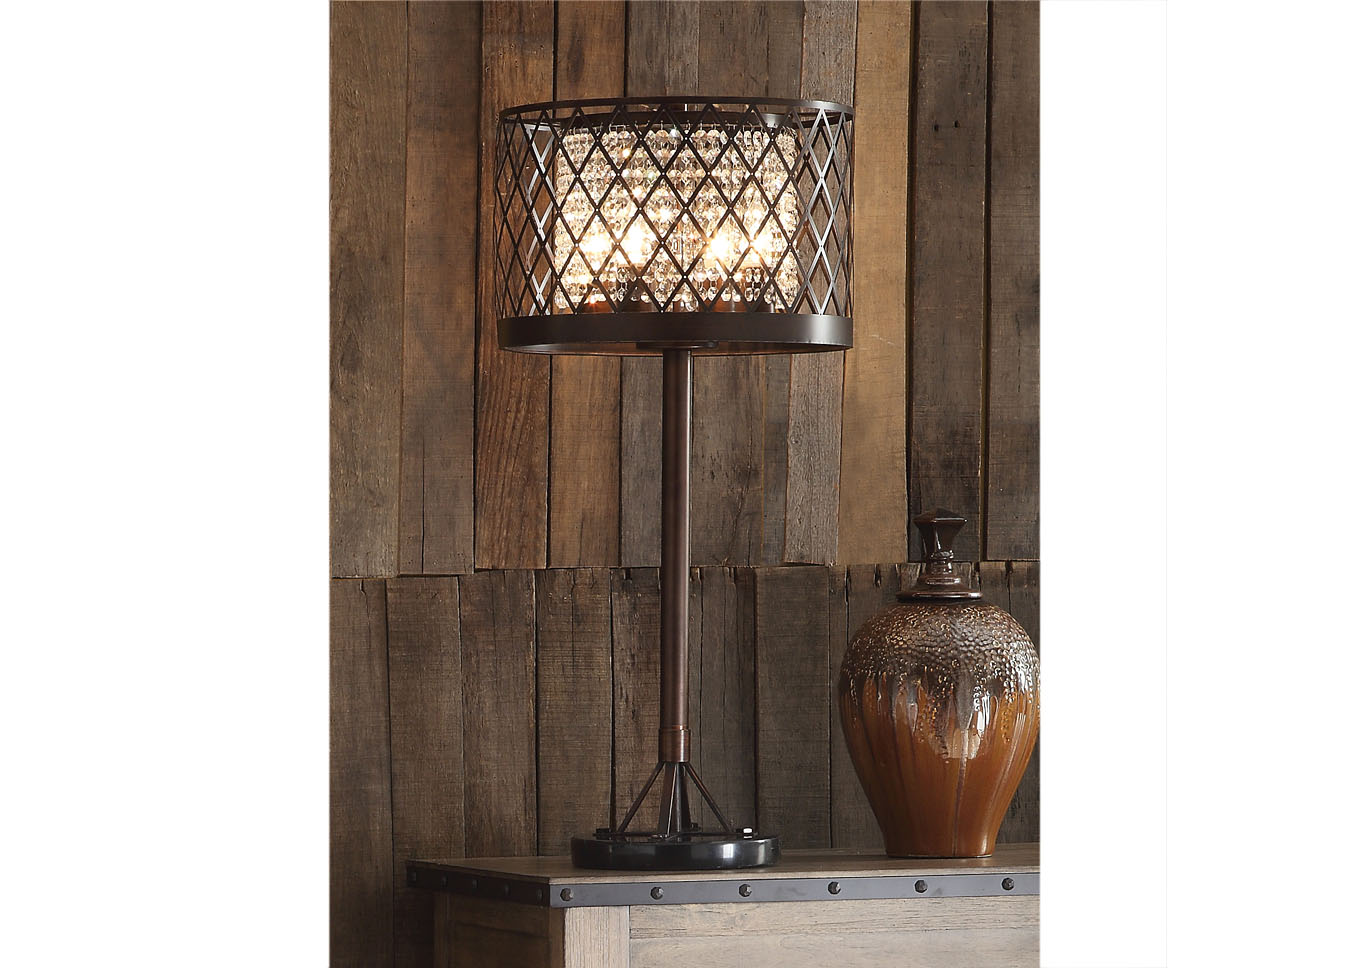 28"H TABLE LAMP,Instore